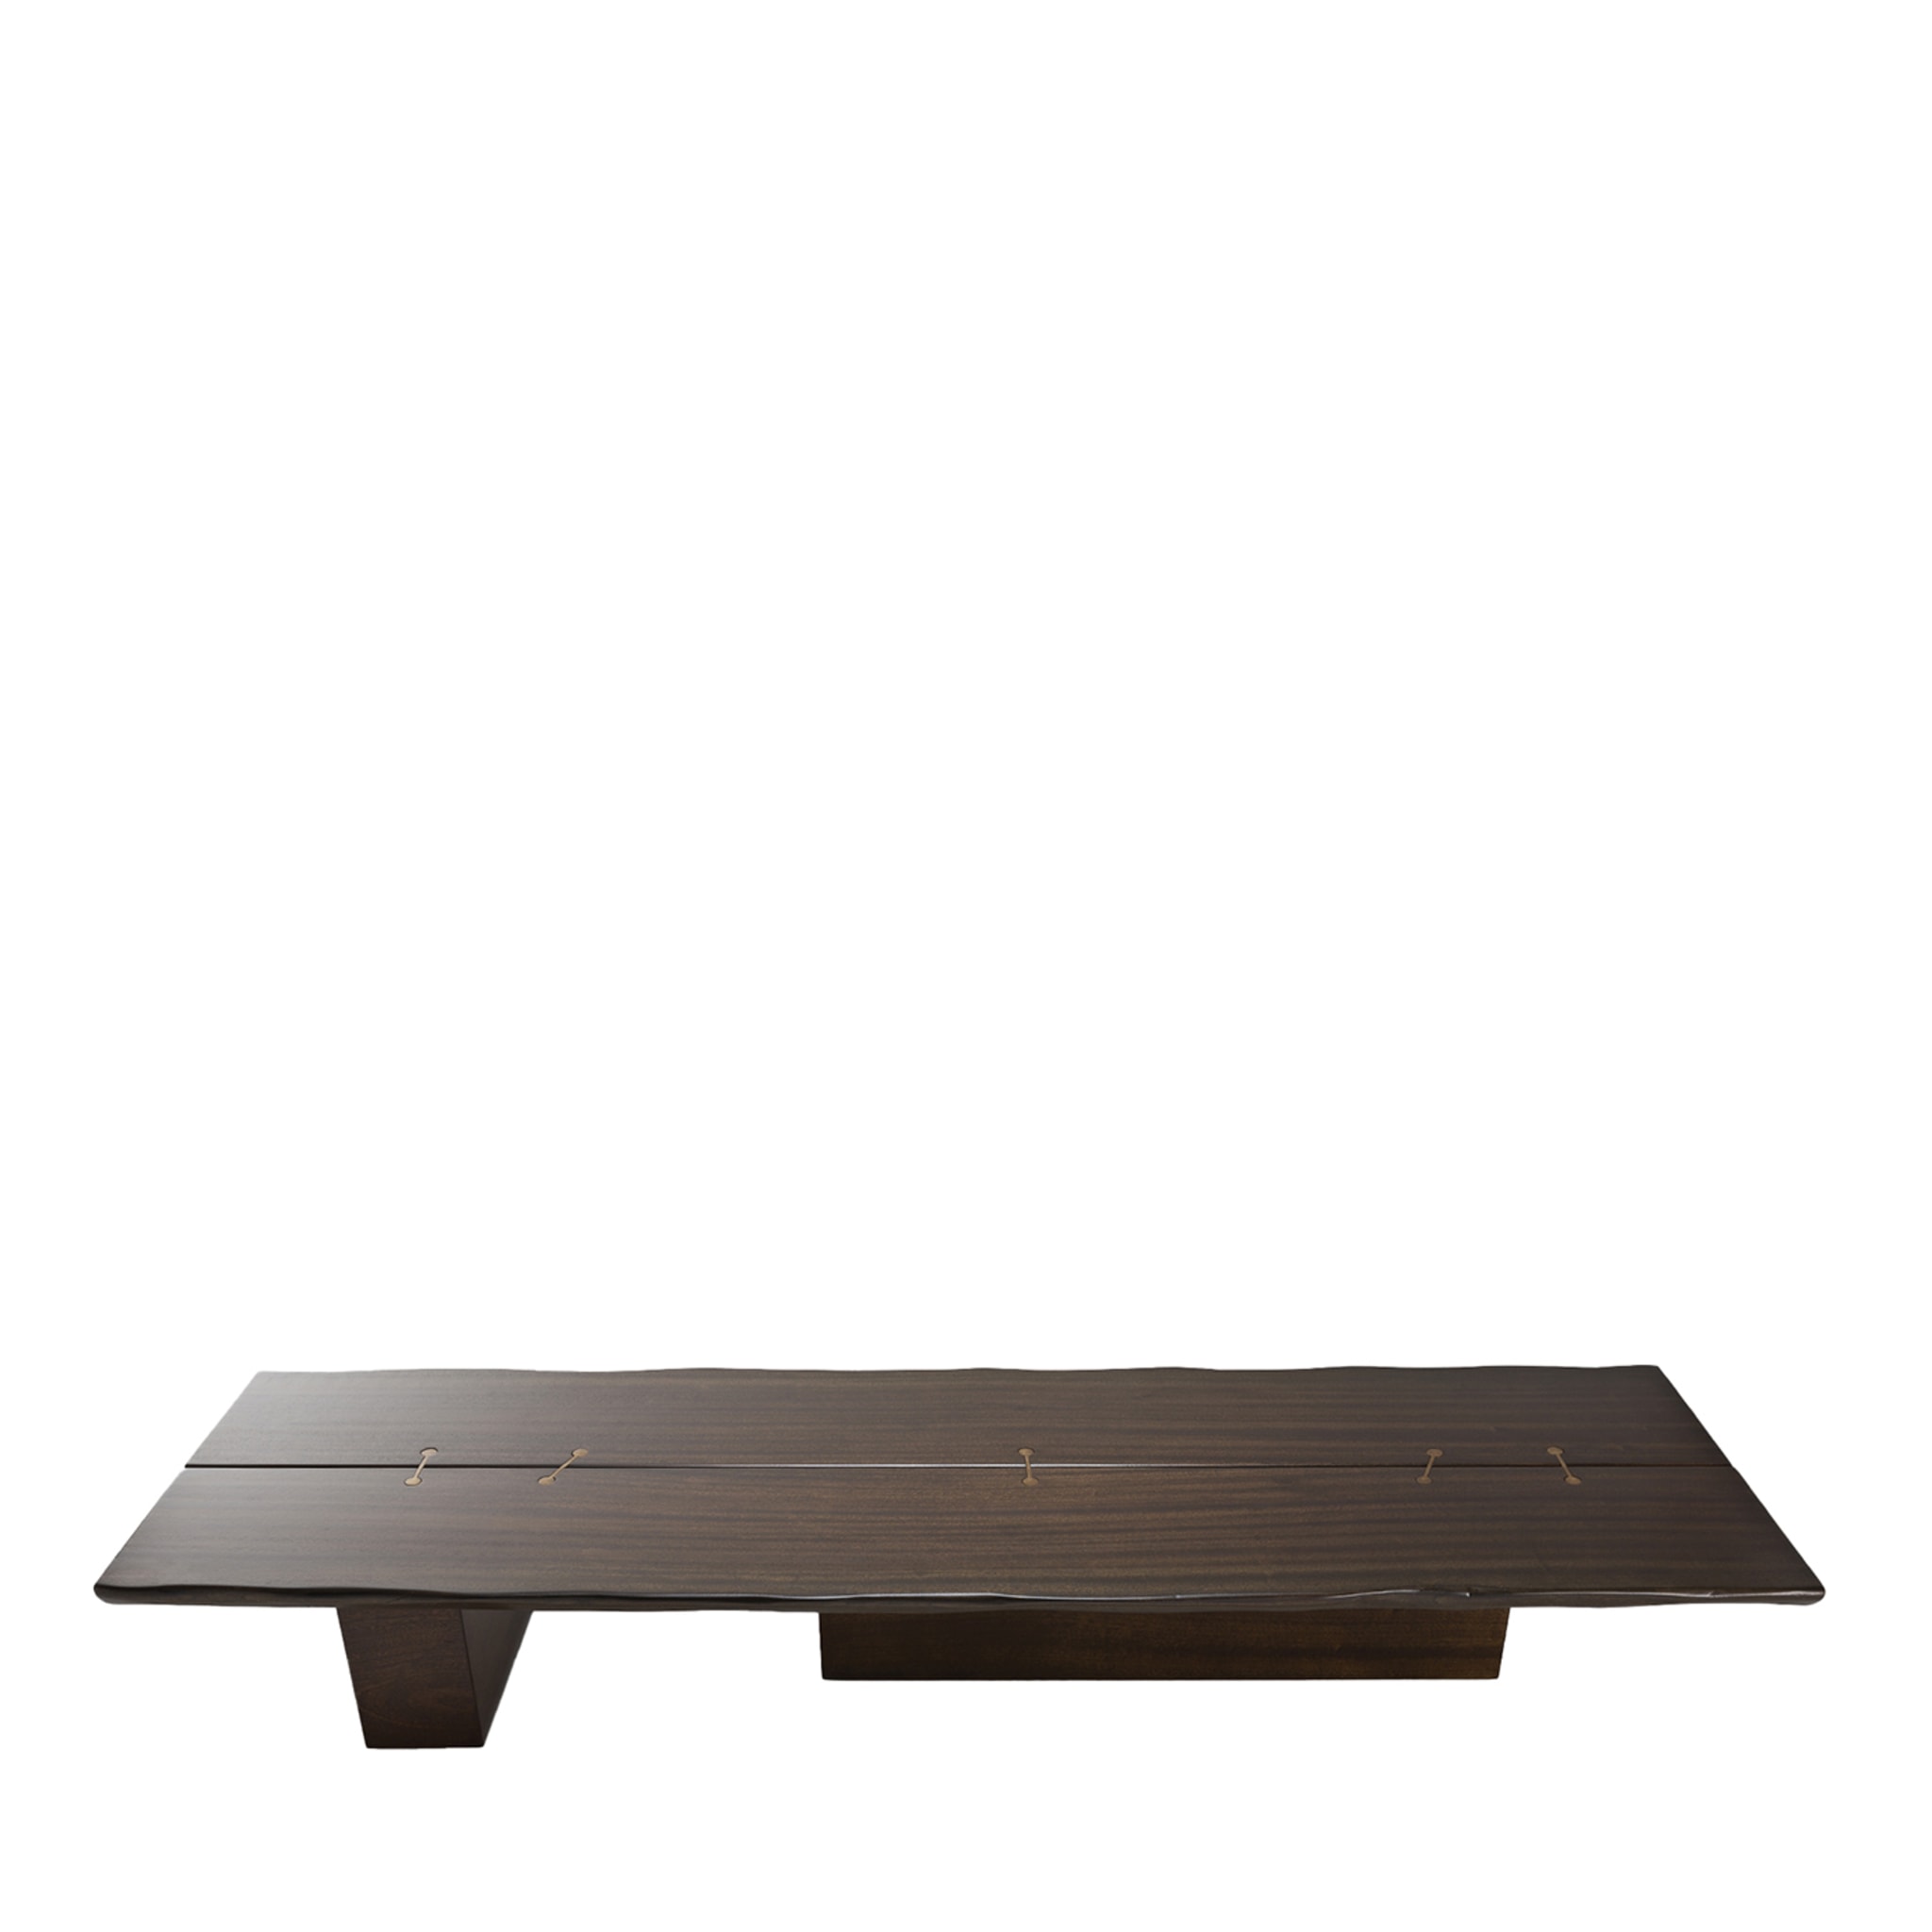 10th Joint Coffee Table by Massimo Castagna - Main view